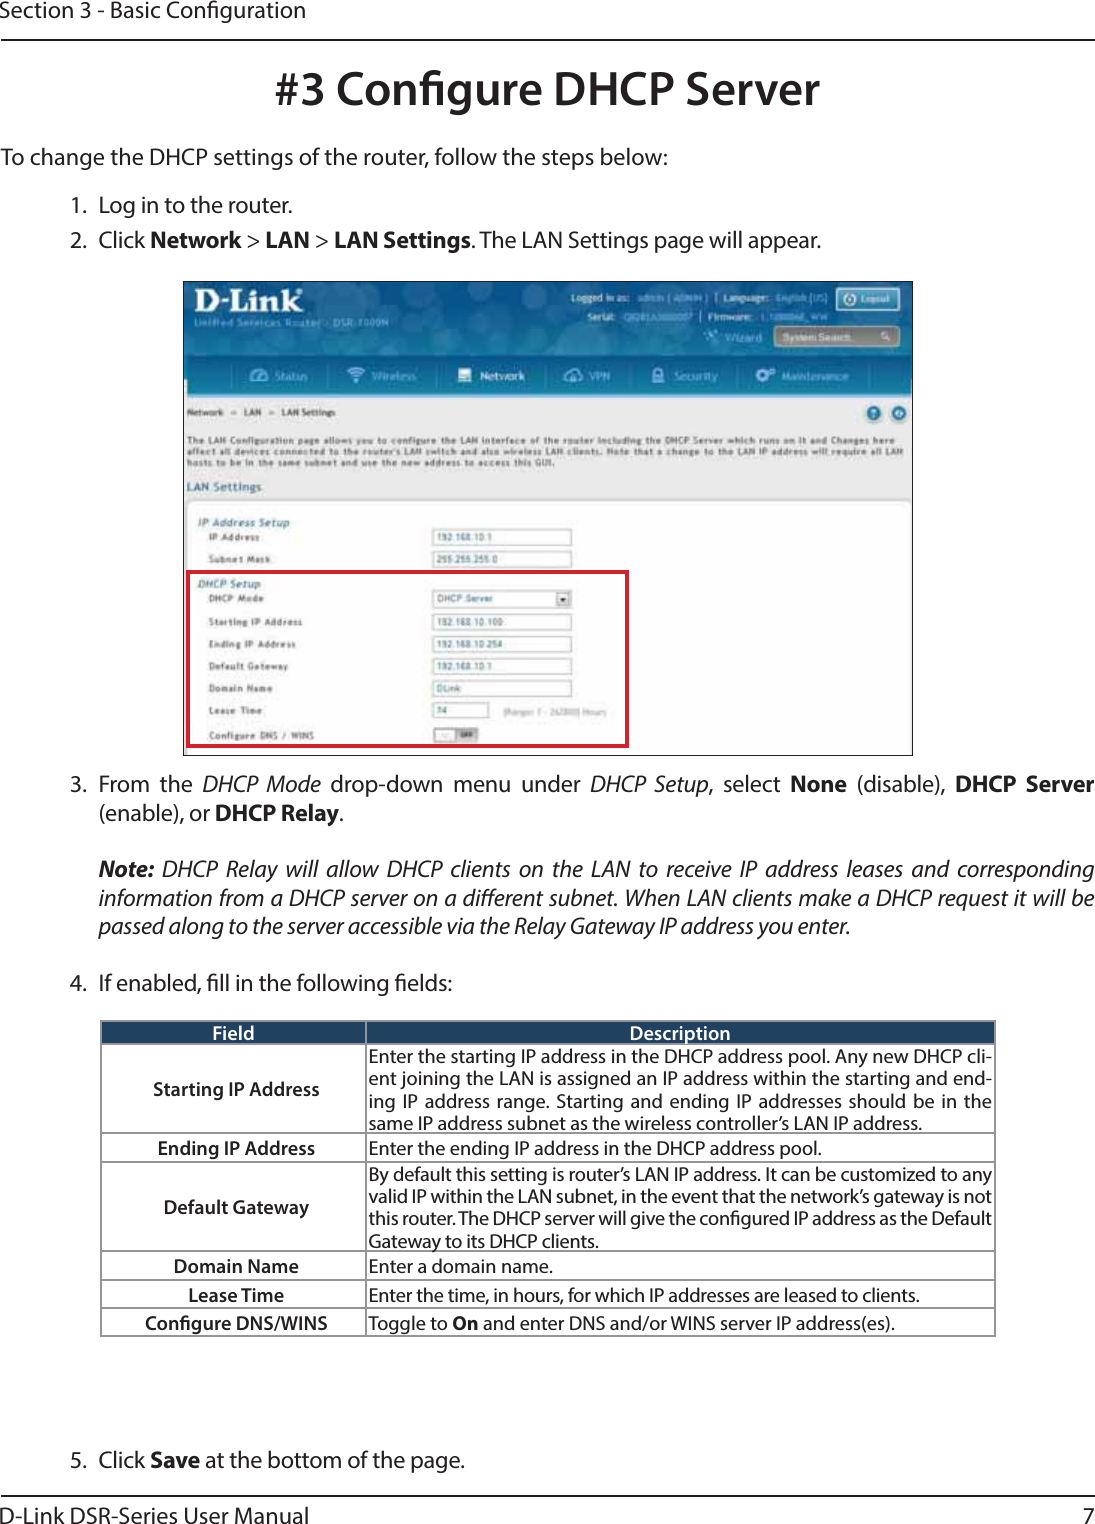 D-Link DSR-Series User Manual 7Section 3 - Basic Conguration#3 Congure DHCP Server1.  Log in to the router. 2. Click Network &gt; LAN &gt; LAN Settings. The LAN Settings page will appear.To change the DHCP settings of the router, follow the steps below:3. From the DHCP Mode drop-down menu under DHCP Setup, select None (disable), DHCP Server (enable), or DHCP Relay. Note: DHCP Relay will allow DHCP clients on the LAN to receive IP address leases and corresponding information from a DHCP server on a dierent subnet. When LAN clients make a DHCP request it will be passed along to the server accessible via the Relay Gateway IP address you enter.4.  If enabled, ll in the following elds:Field DescriptionStarting IP AddressEnter the starting IP address in the DHCP address pool. Any new DHCP cli-ent joining the LAN is assigned an IP address within the starting and end-ing IP address range. Starting and ending IP addresses should be in the same IP address subnet as the wireless controller’s LAN IP address.Ending IP Address Enter the ending IP address in the DHCP address pool.Default GatewayBy default this setting is router’s LAN IP address. It can be customized to any valid IP within the LAN subnet, in the event that the network’s gateway is not this router. The DHCP server will give the congured IP address as the Default Gateway to its DHCP clients.Domain Name Enter a domain name.Lease Time Enter the time, in hours, for which IP addresses are leased to clients.Congure DNS/WINS Toggle to On and enter DNS and/or WINS server IP address(es).5. Click Save at the bottom of the page.